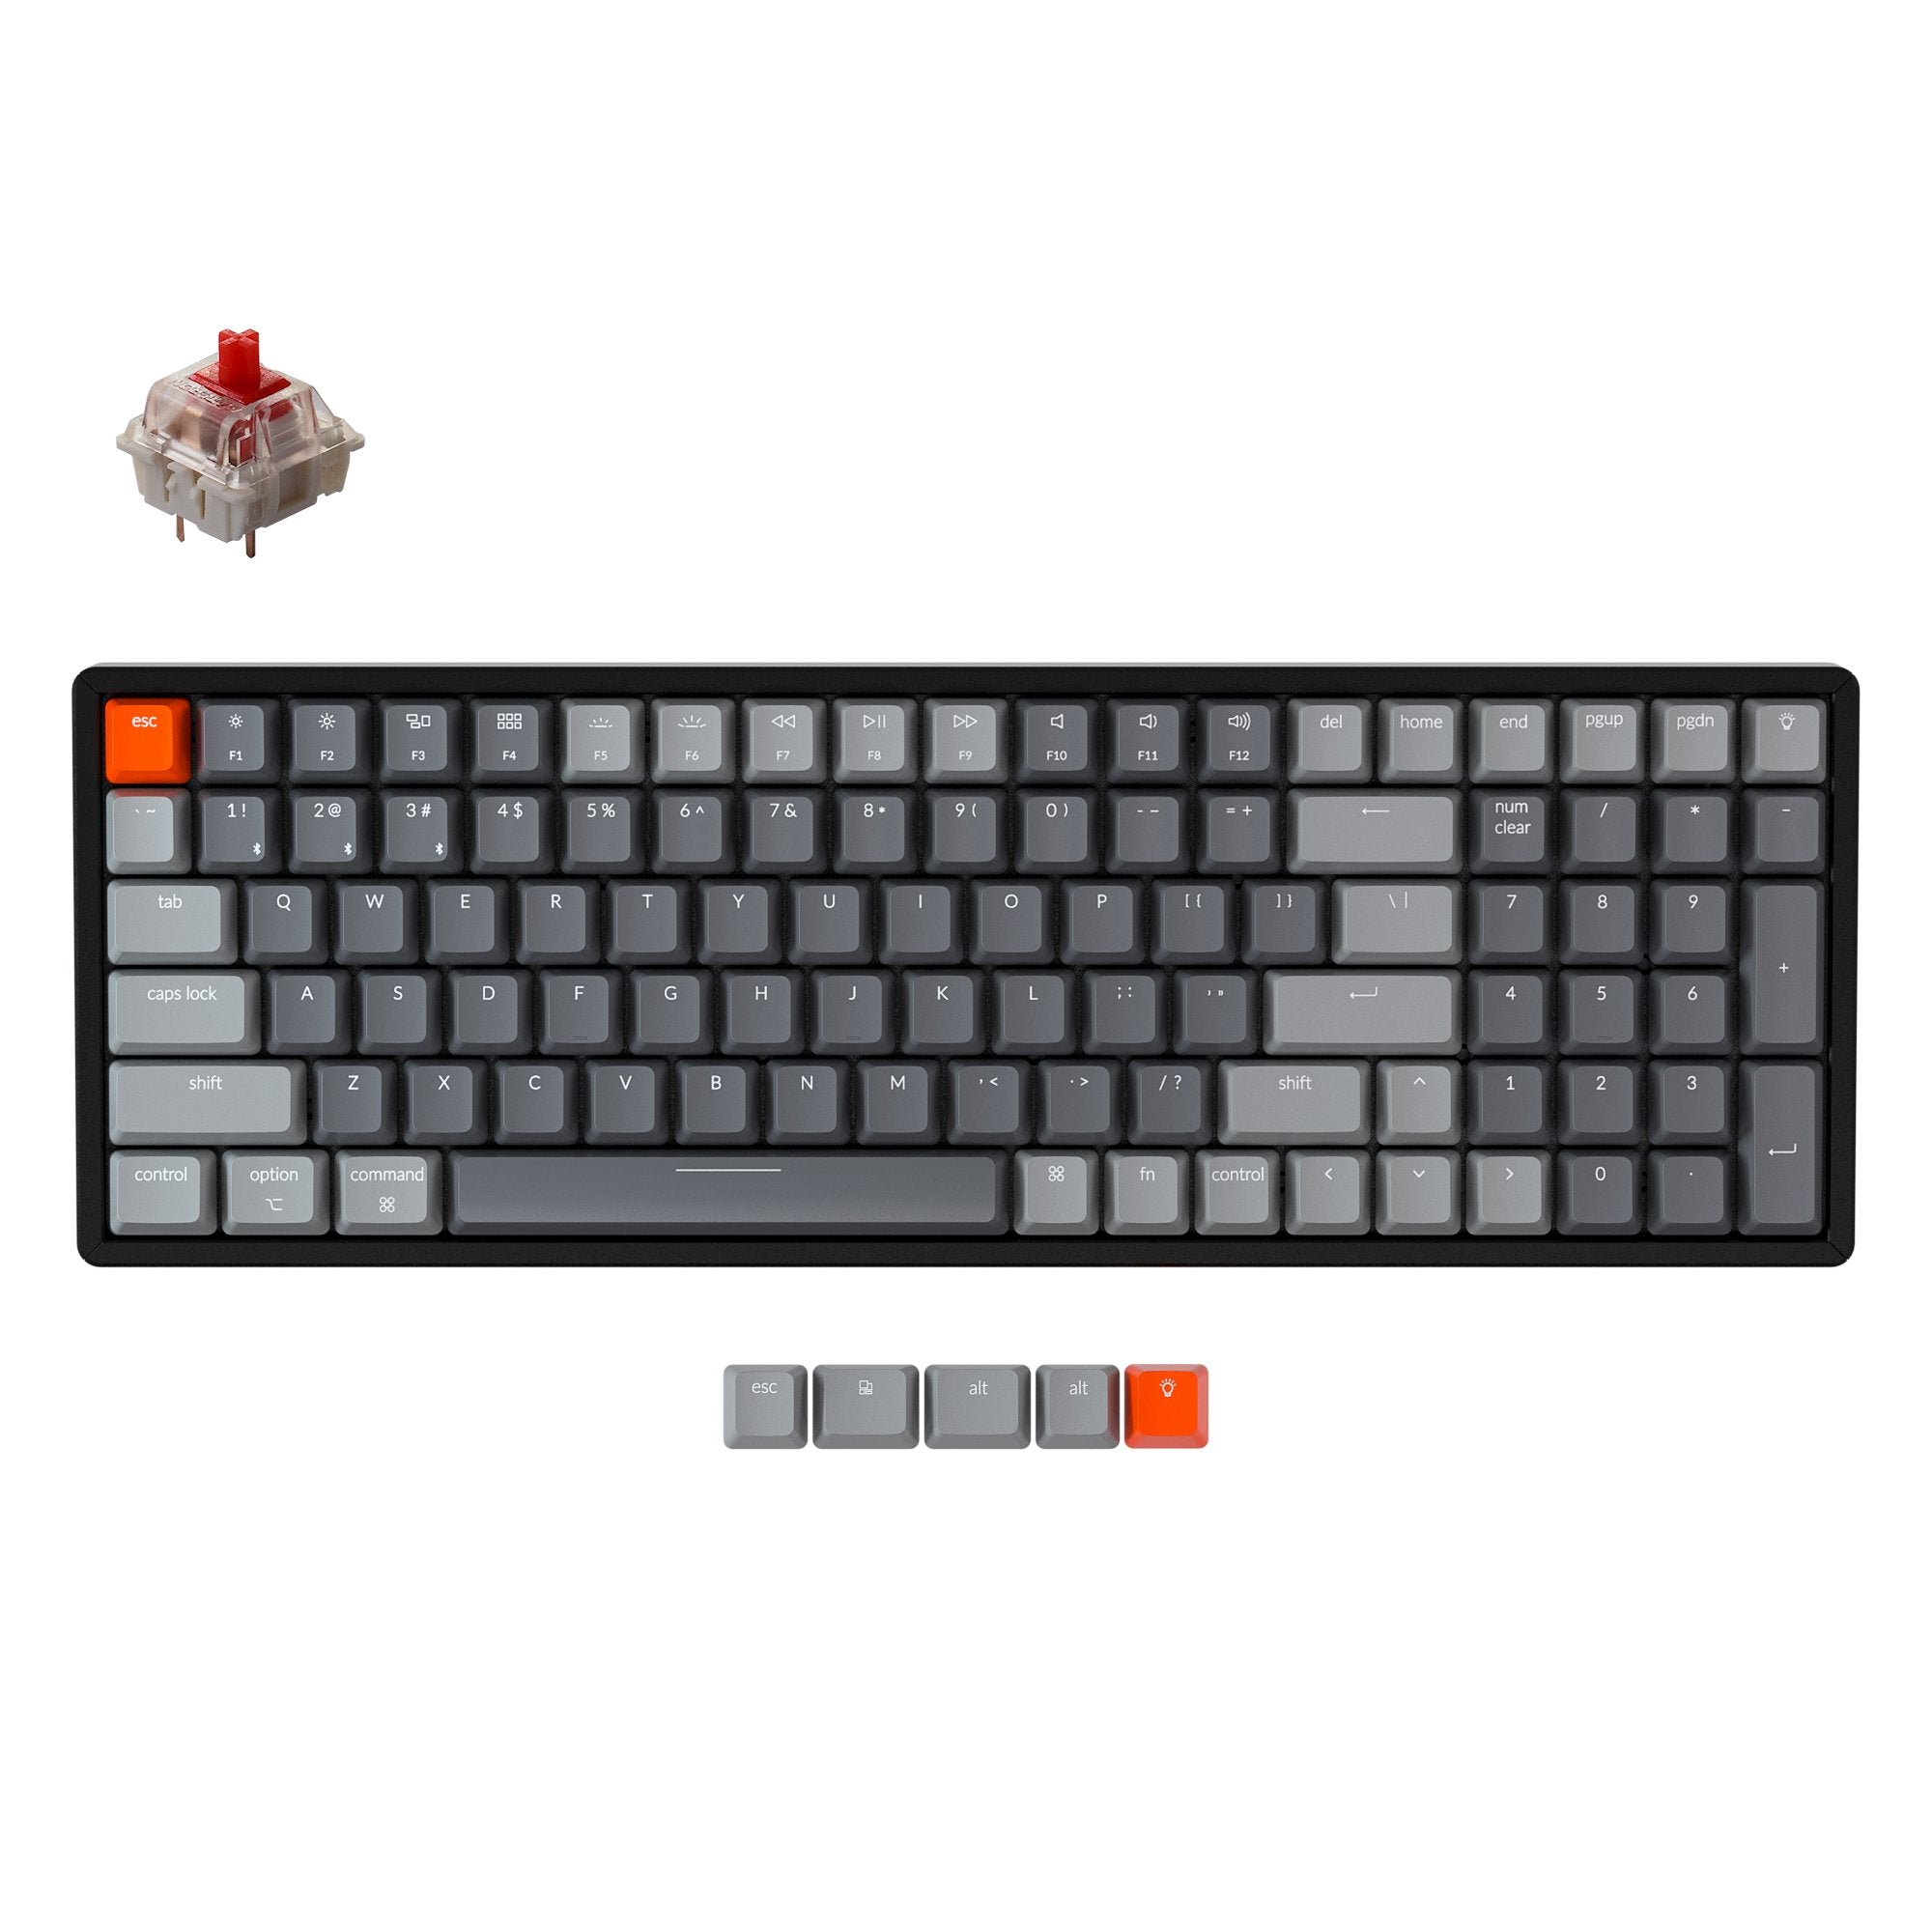 Keychron K4 Version 2 Hot-swappable Wireless Mechanical Keyboard, 100-keys layout for Mac Windows iOS with Gateron red switch with type-C RGB or white backlight and aluminum frame